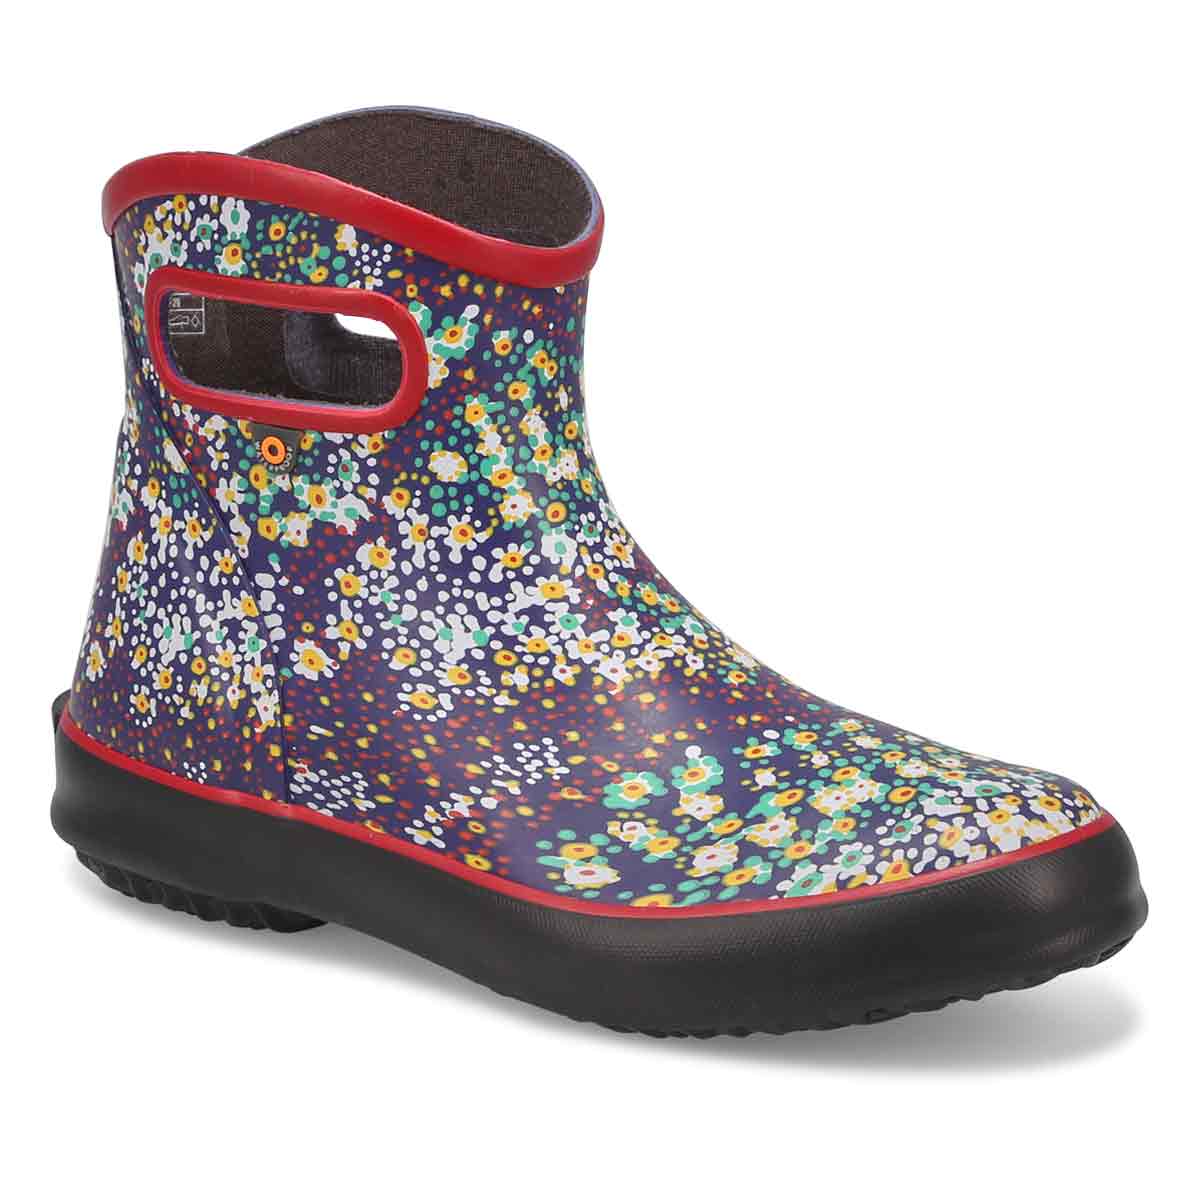 Bogs Women's Patch Ankle Rain Boot - Red Mult | SoftMoc.com